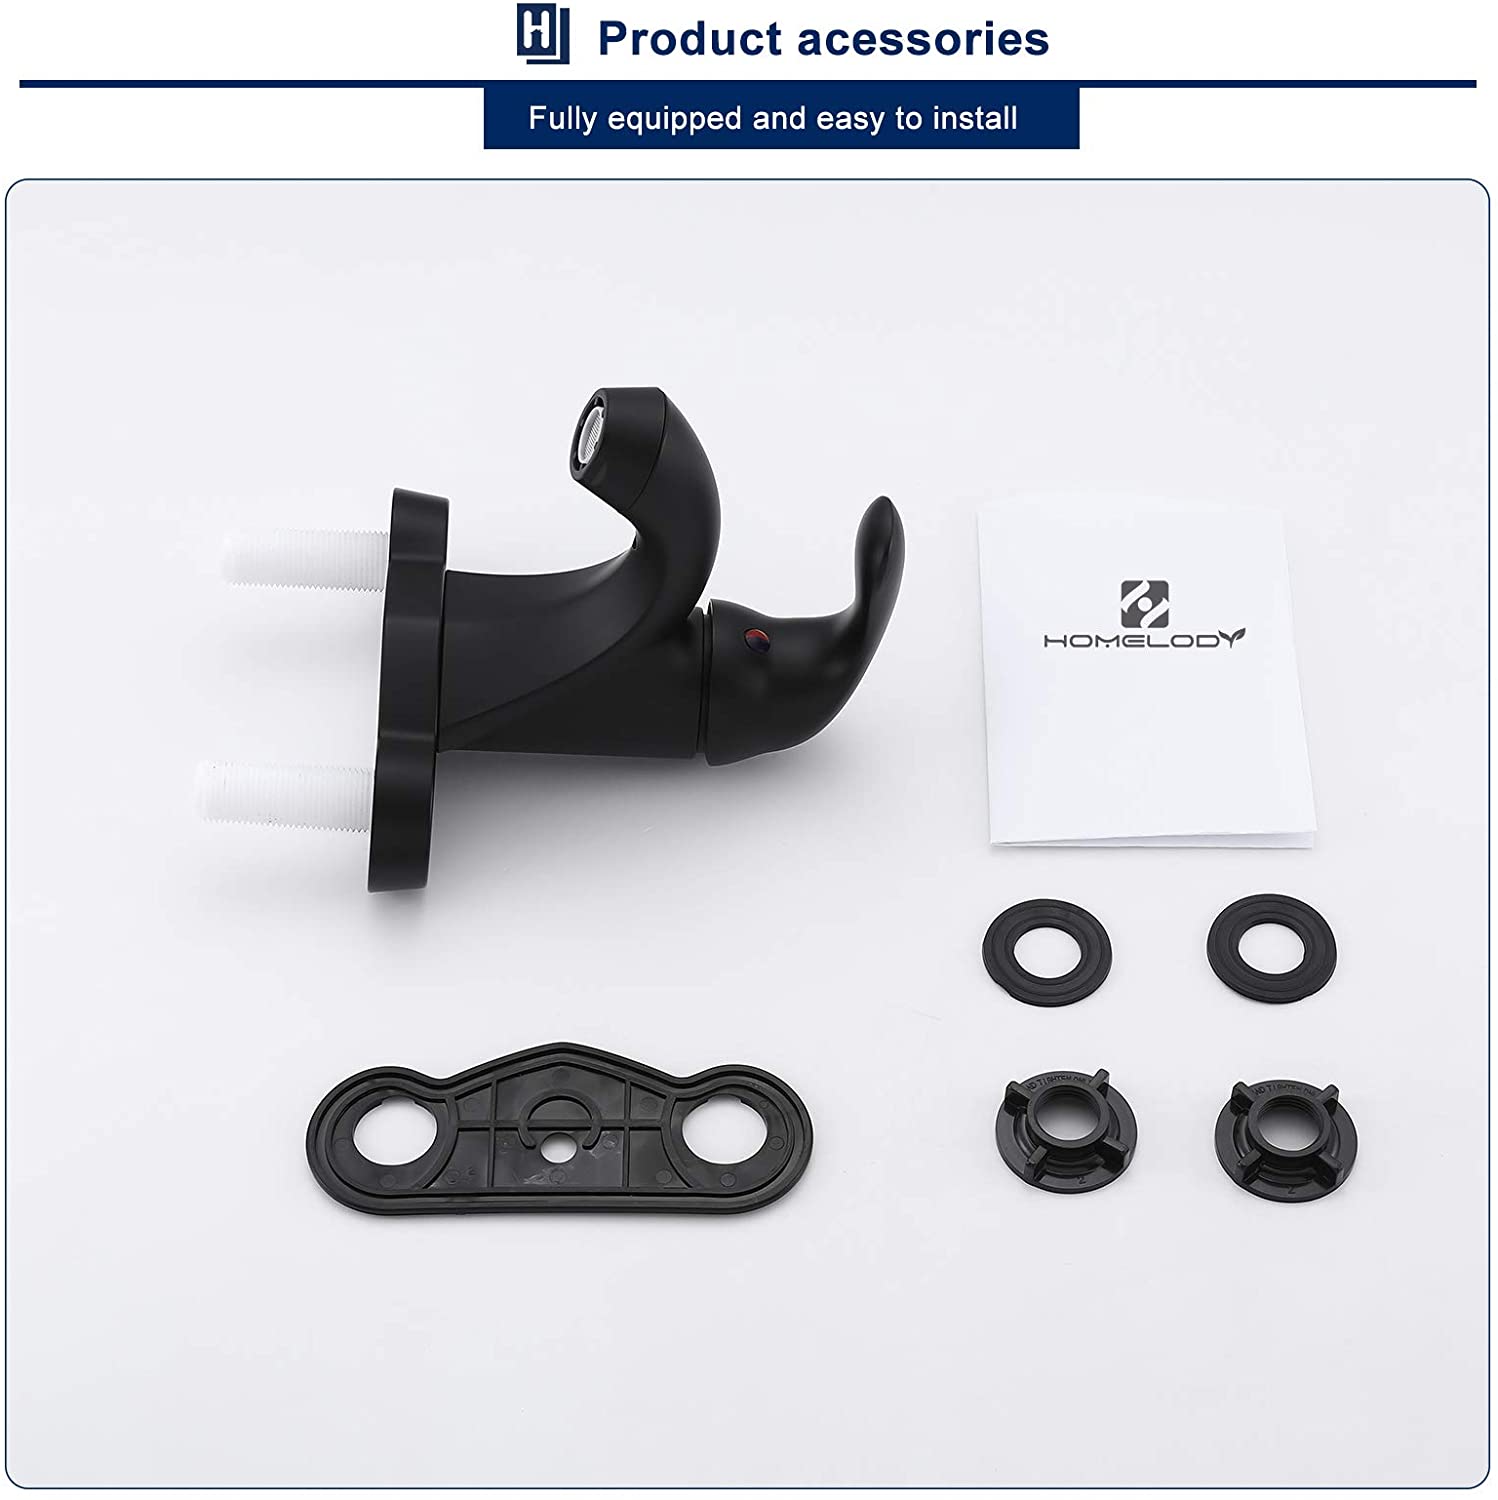 HOMELODY Plastic Bathroom Faucet Matte Black 4 inch Centerset - Homelody